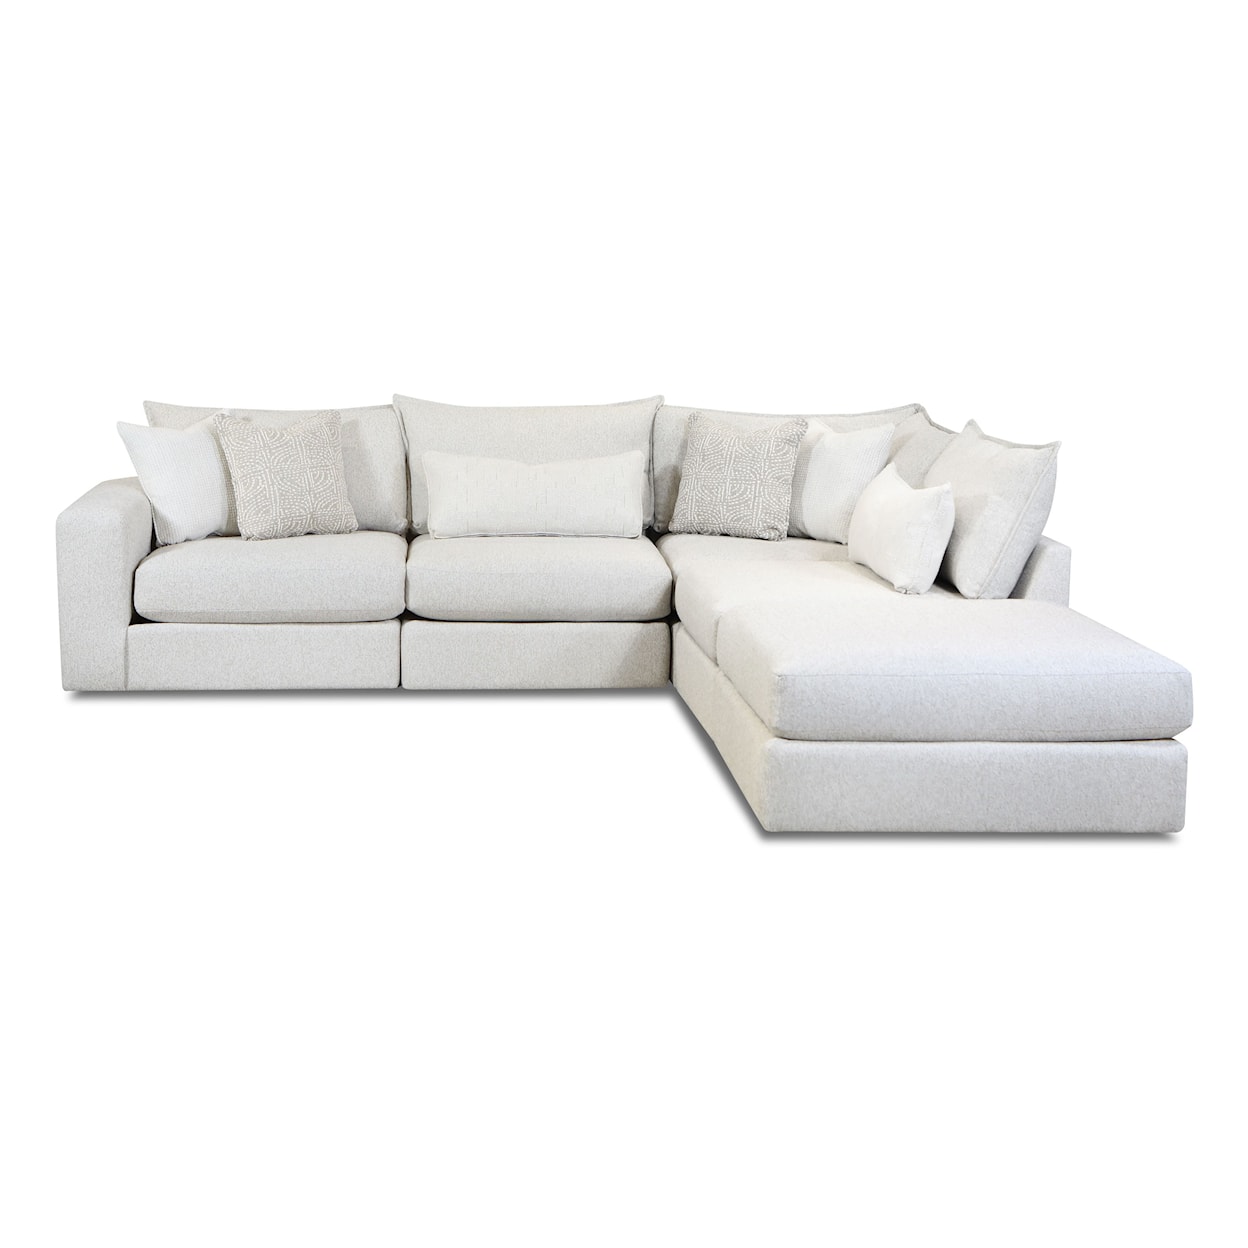 Fusion Furniture 7000 HOGAN COTTON Modular Sectional with Chaise